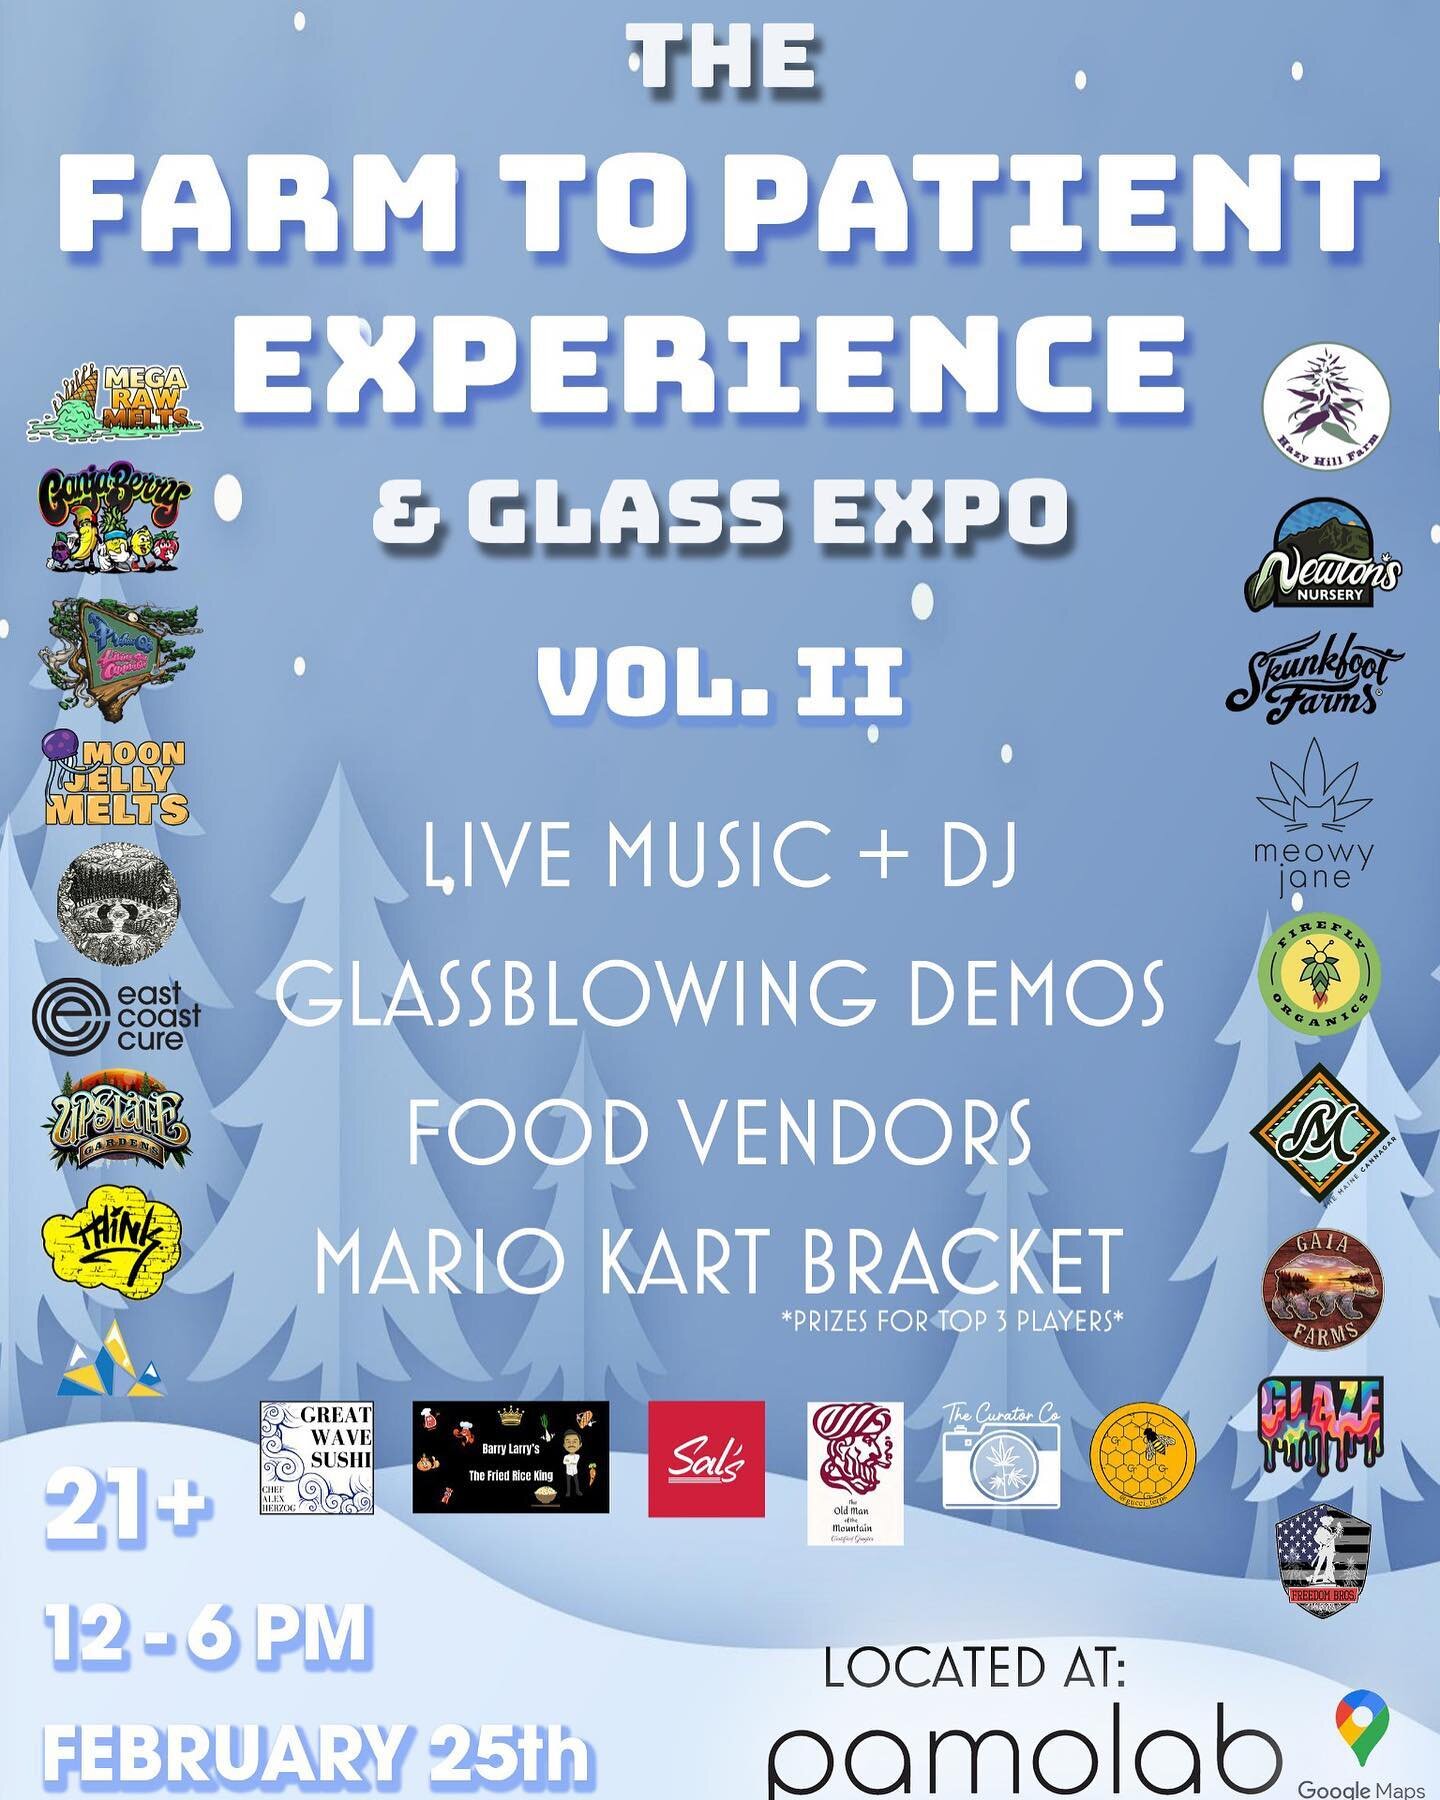 Farm 2 Patient &amp; Glass Expo:
&bull;
Sat February 25th / 12pm-6pm / @pamolab 
&bull;
Doing it again and doing it better and we got a Mario Cart Tourney! Thank you @pamolab and @ganjaberryy for all the hard work.
&bull;
First 50 patients will recei